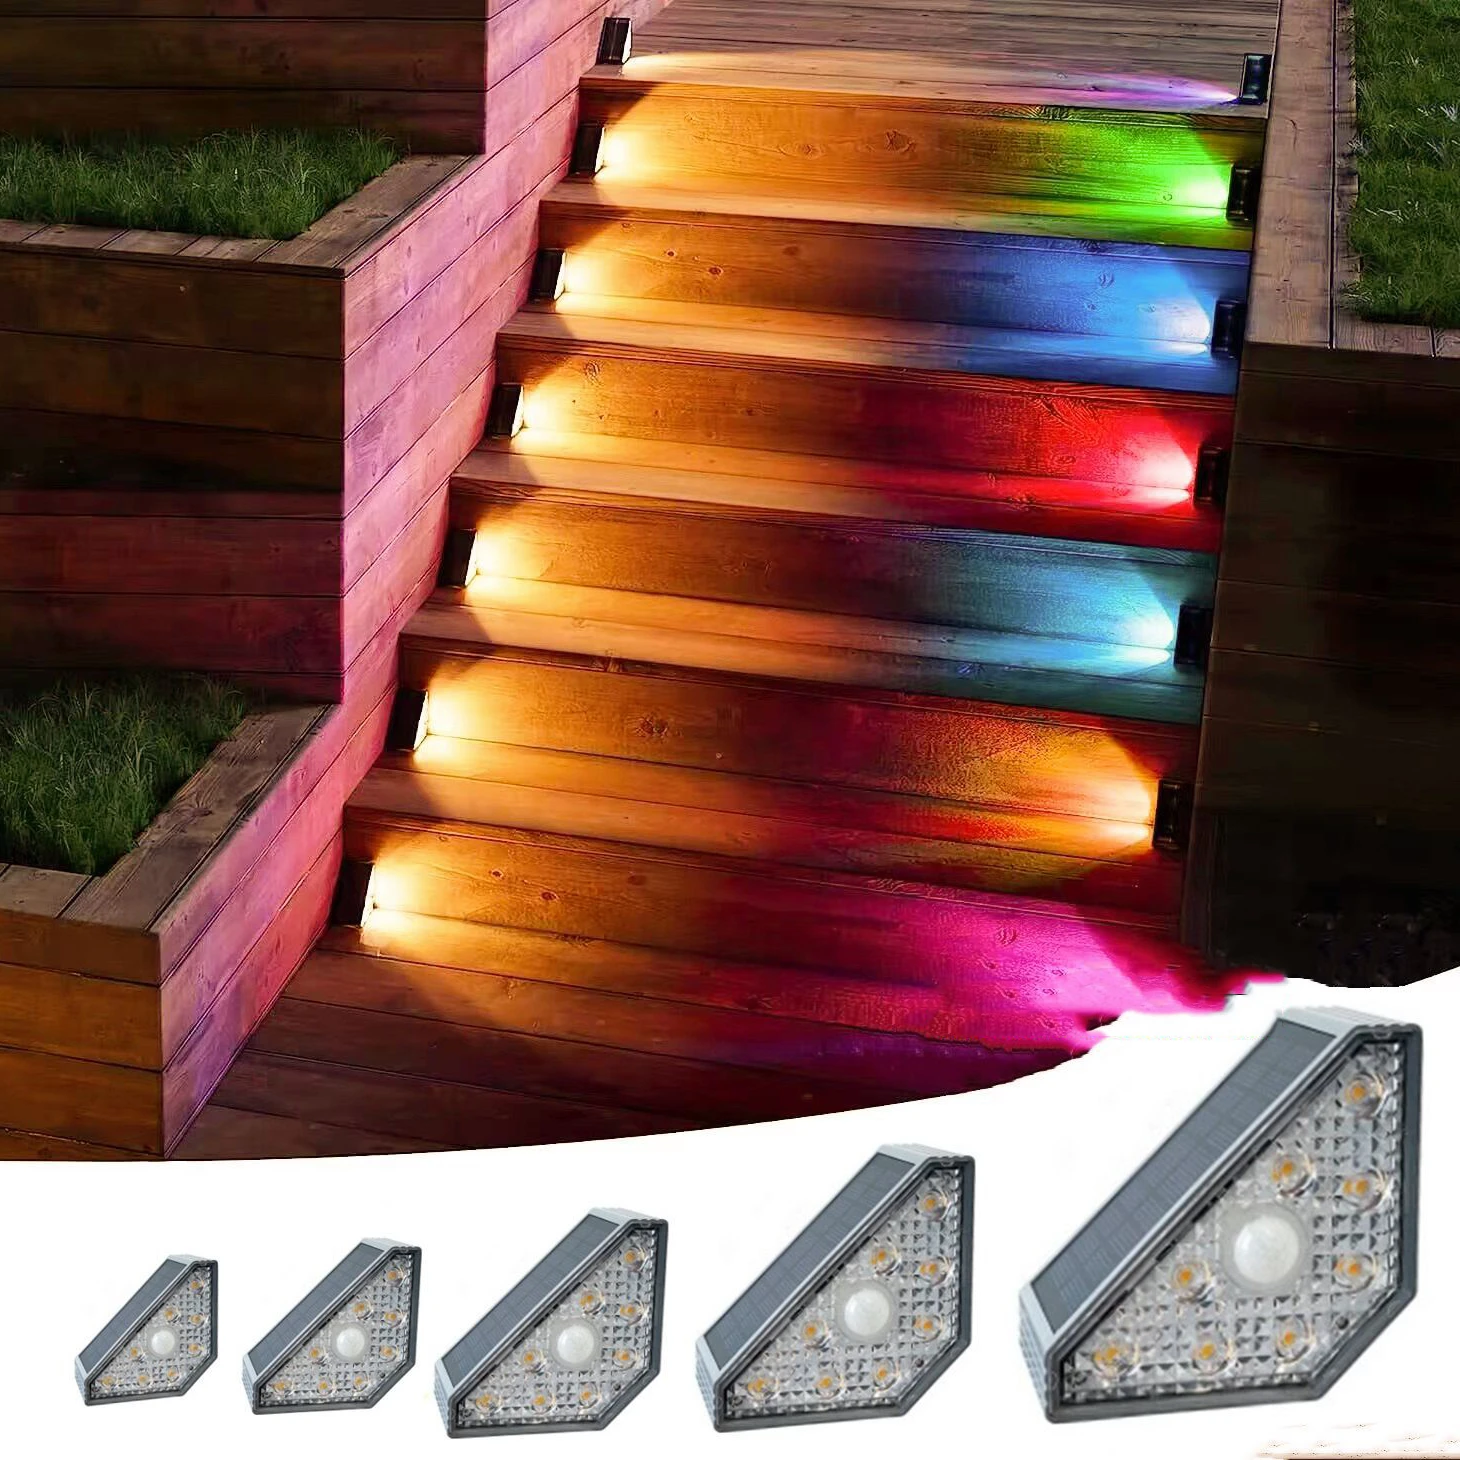 solar lights outdoor waterproof 180led 208cob solar wall lamp battery 2400mah with 3 mode lighting for patio yard garden garage Solar LED Stair Light with Motion Sensor LED Step 3 Mode RGB Lighting IP67 Decorative Light for Patio Garden Solar Panel Lamps